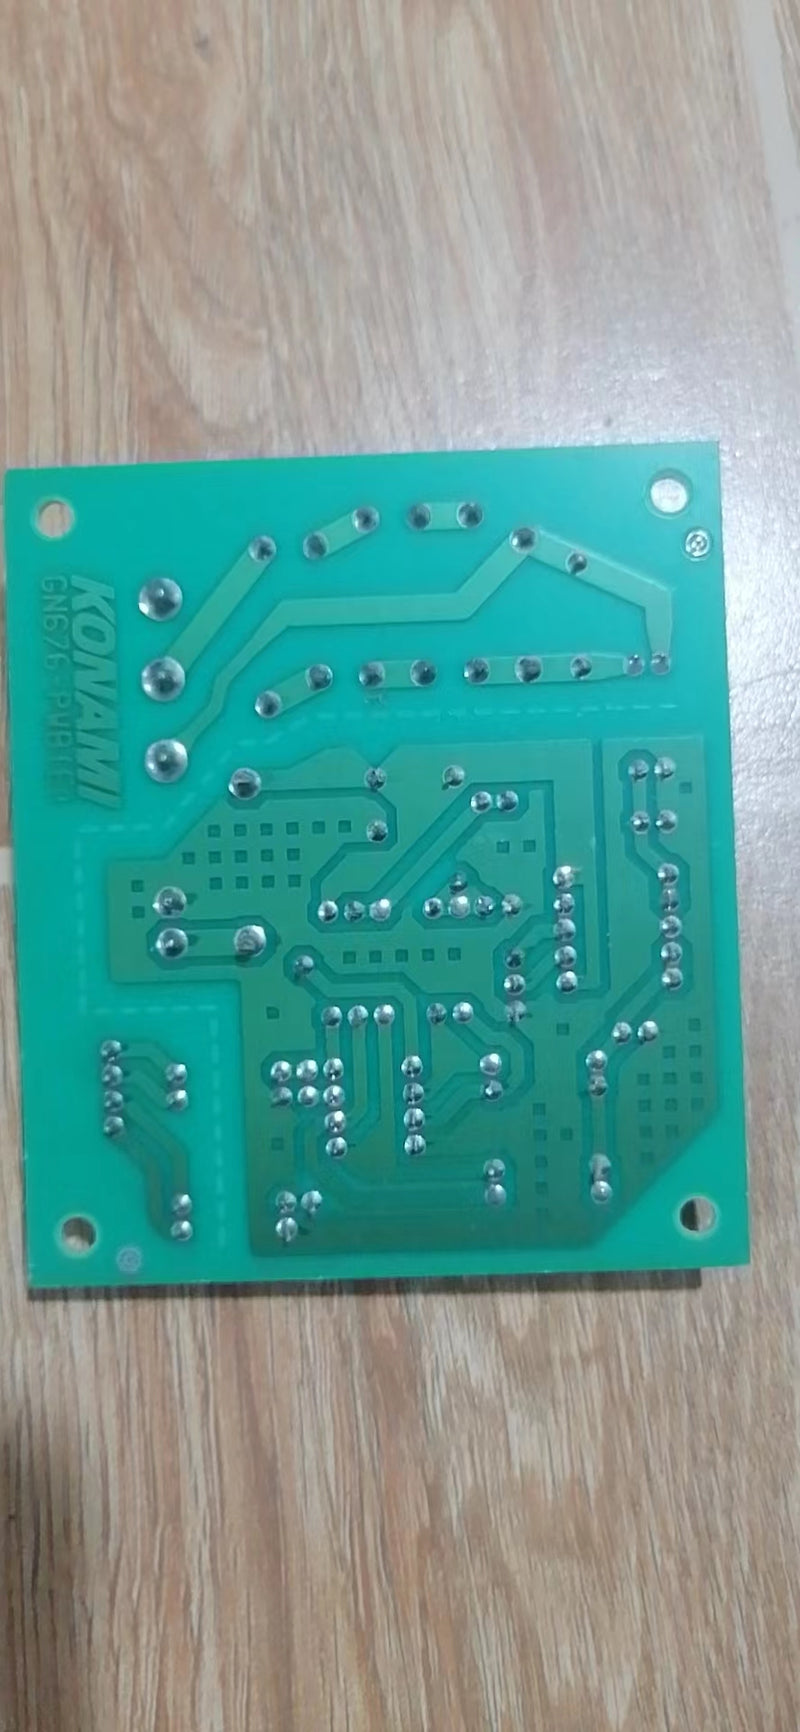 unknown and untested   konami board GN676 PWB(B).